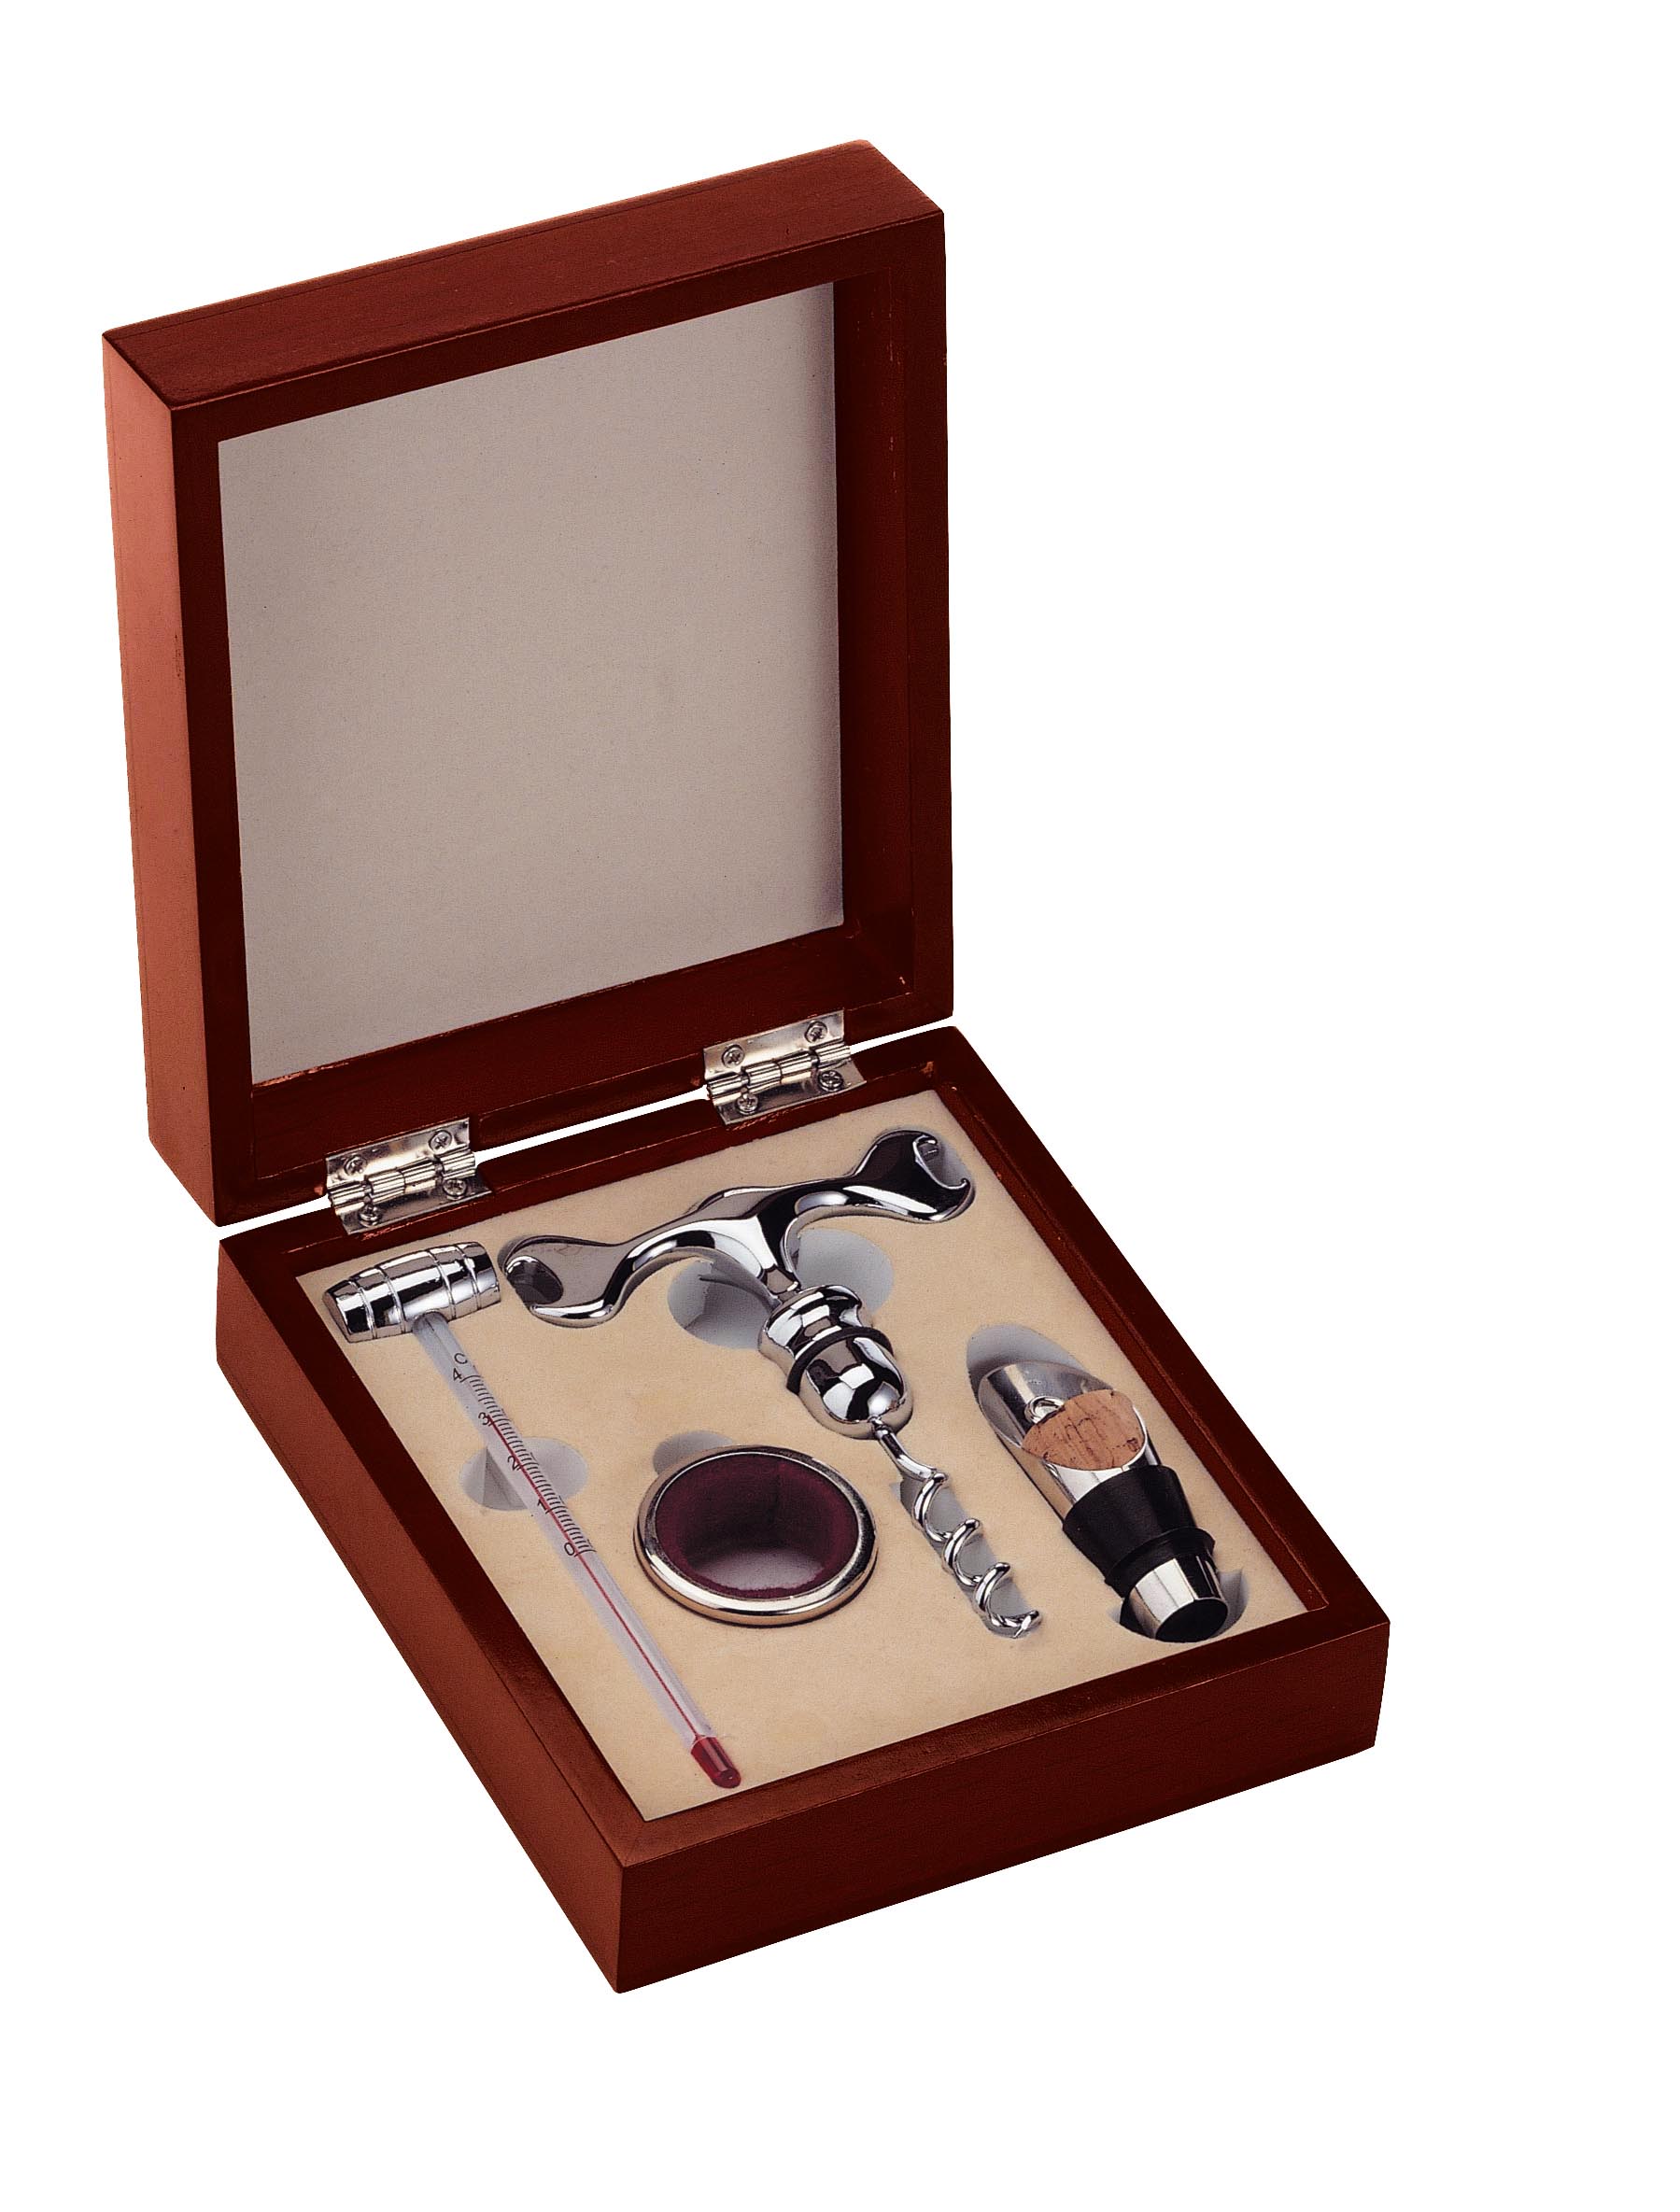 Luxurious wine set in wooden gift box.